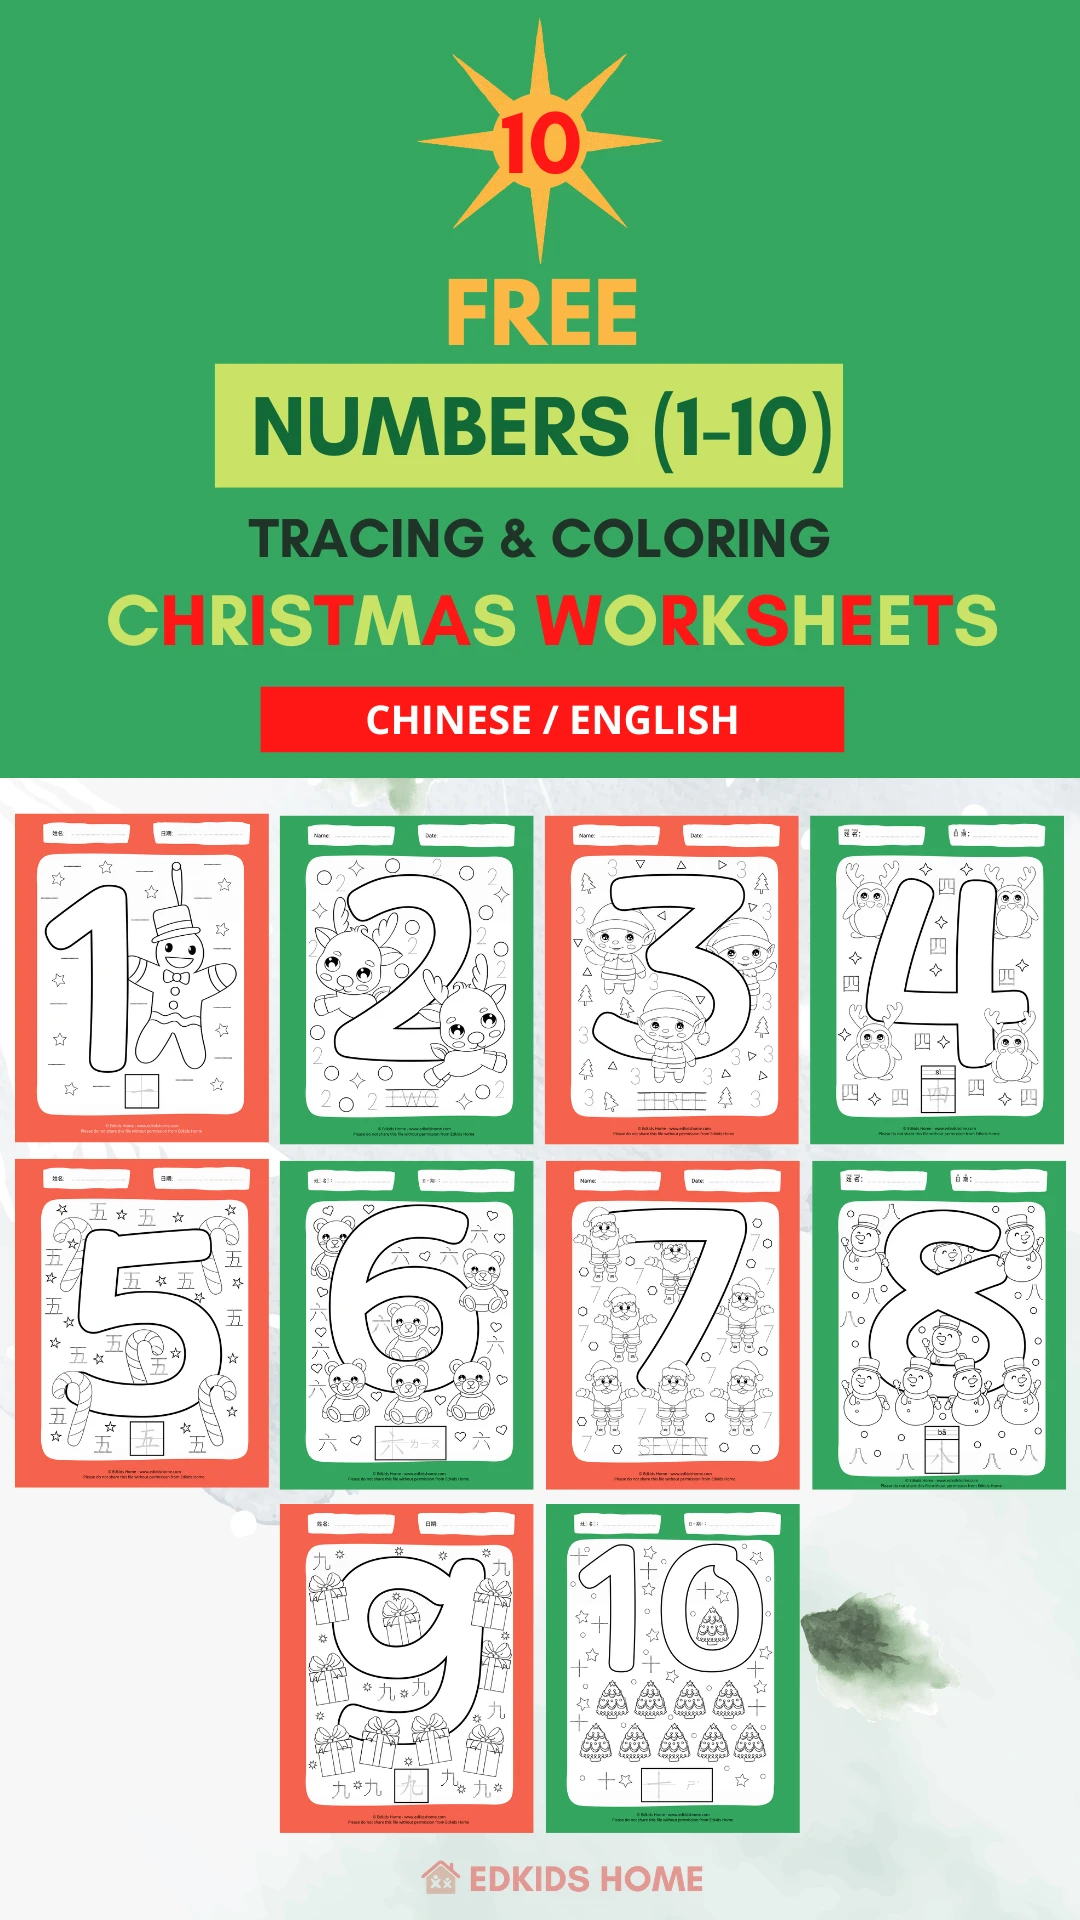 10 Free Numbers 1-10 Tracing & Coloring Christmas Worksheets (Chinese / English)